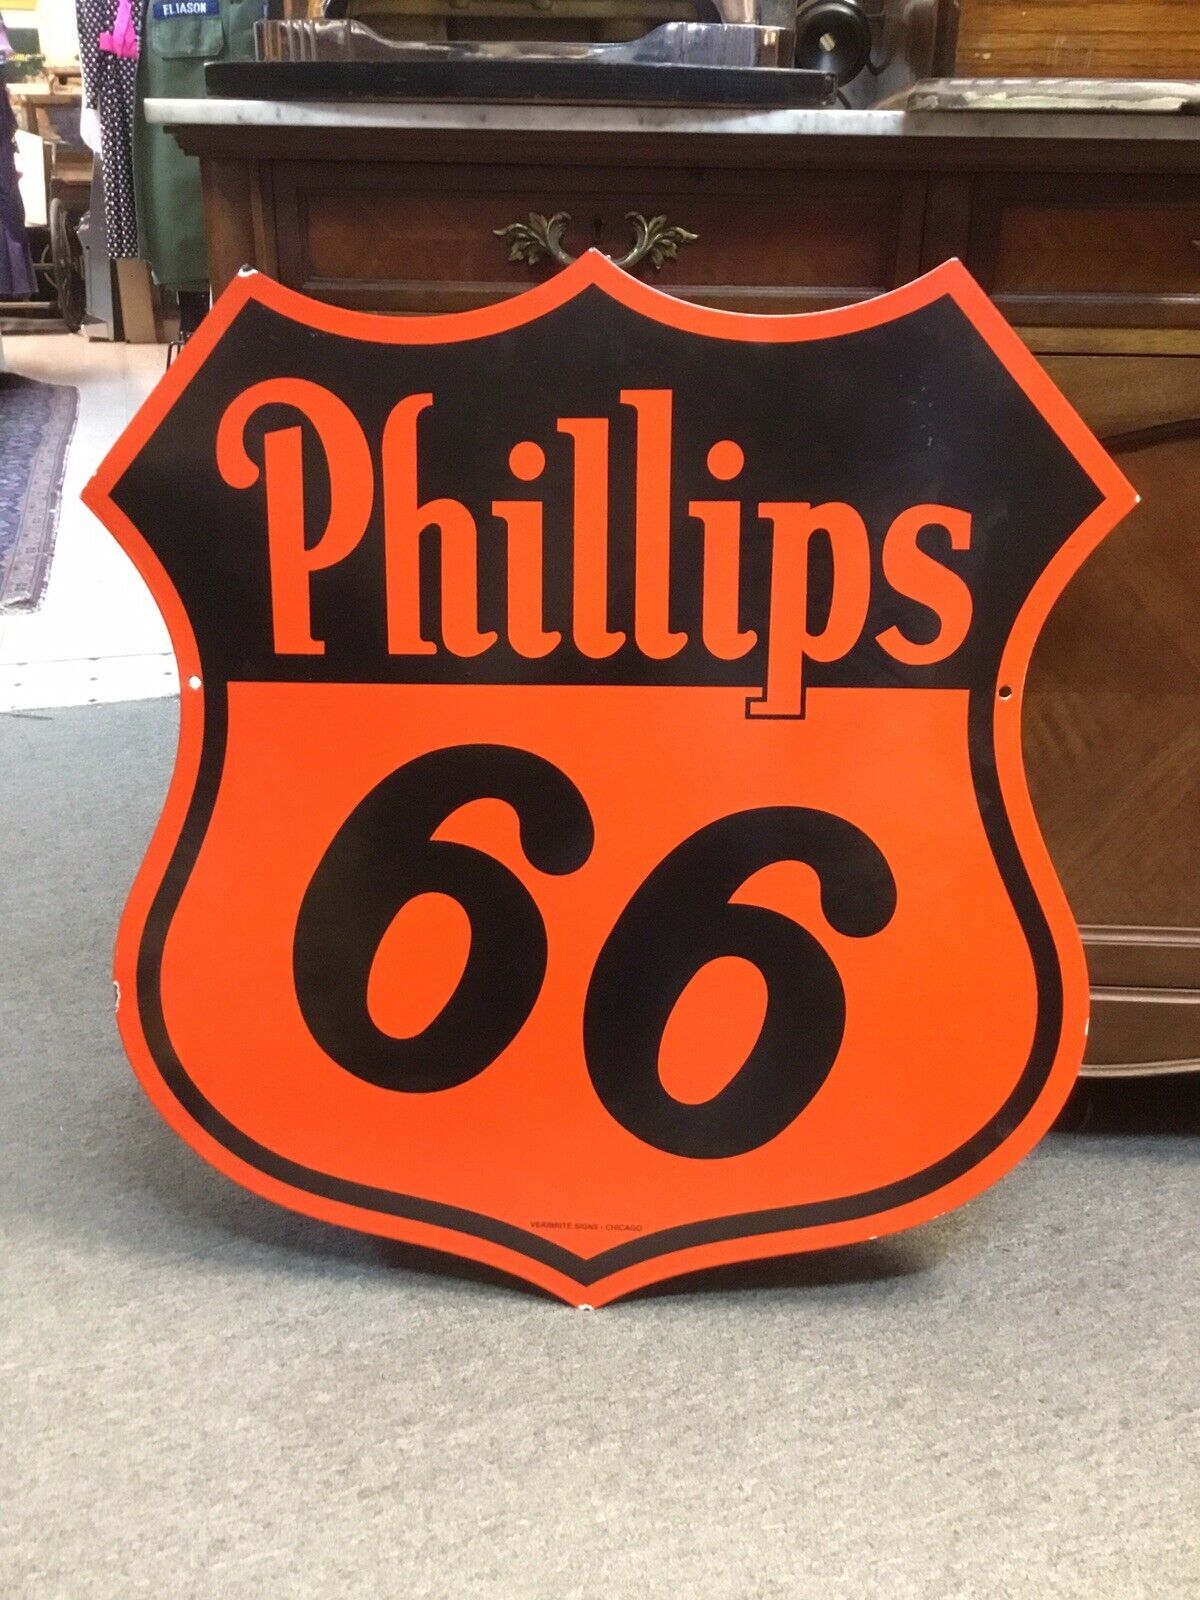 Phillips 66 Double Sided Porcelain Advertising Sign Gas Oil Veribrite 30 inches.